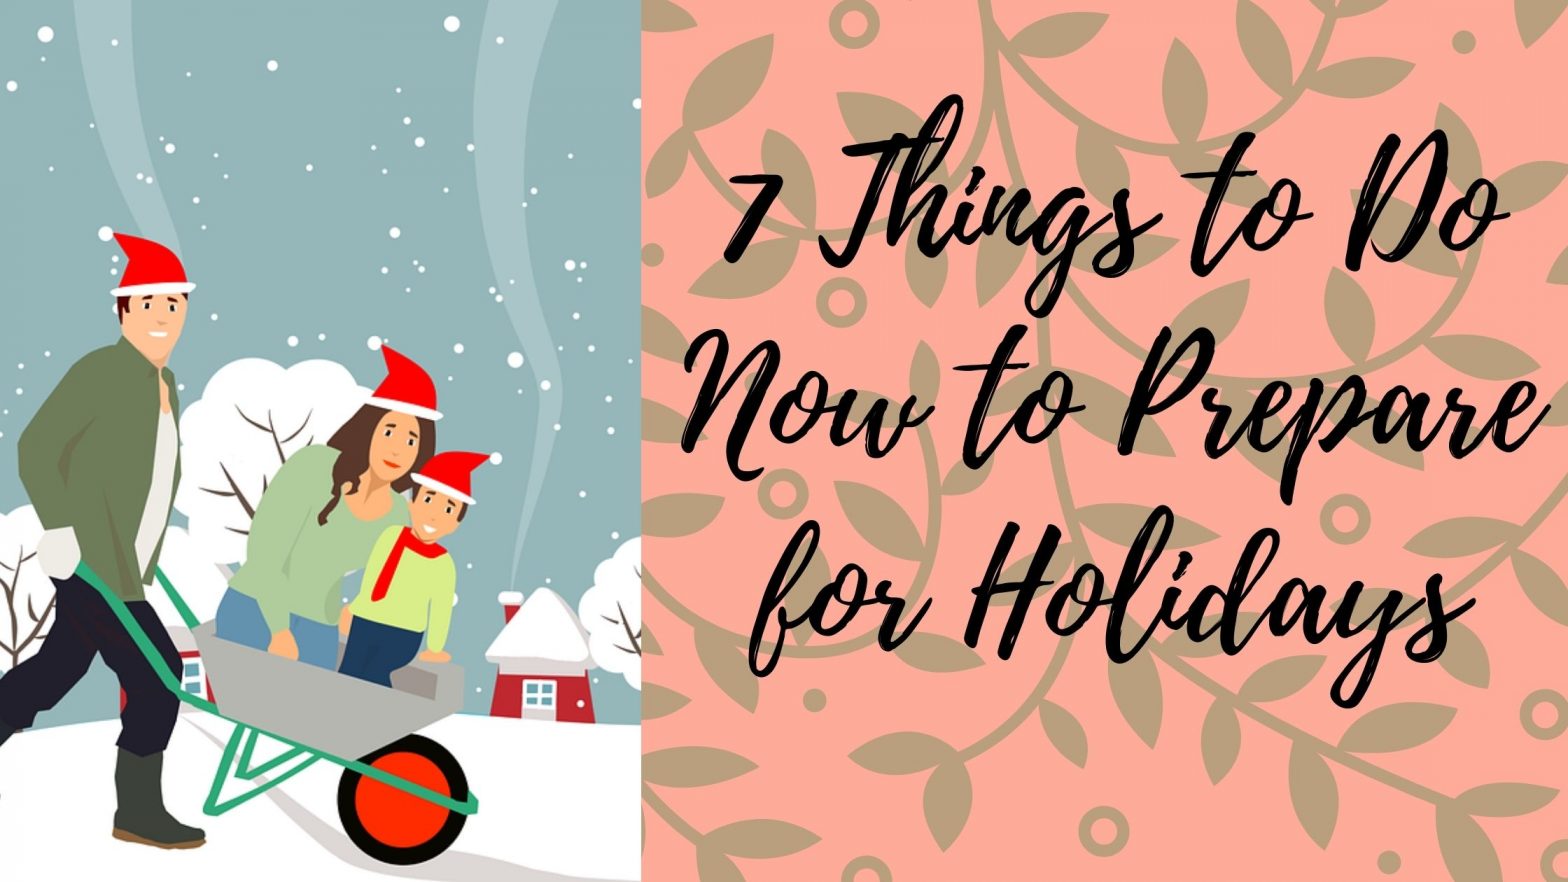 7 Thoughtful Things to Do Now to Prepare for Holidays